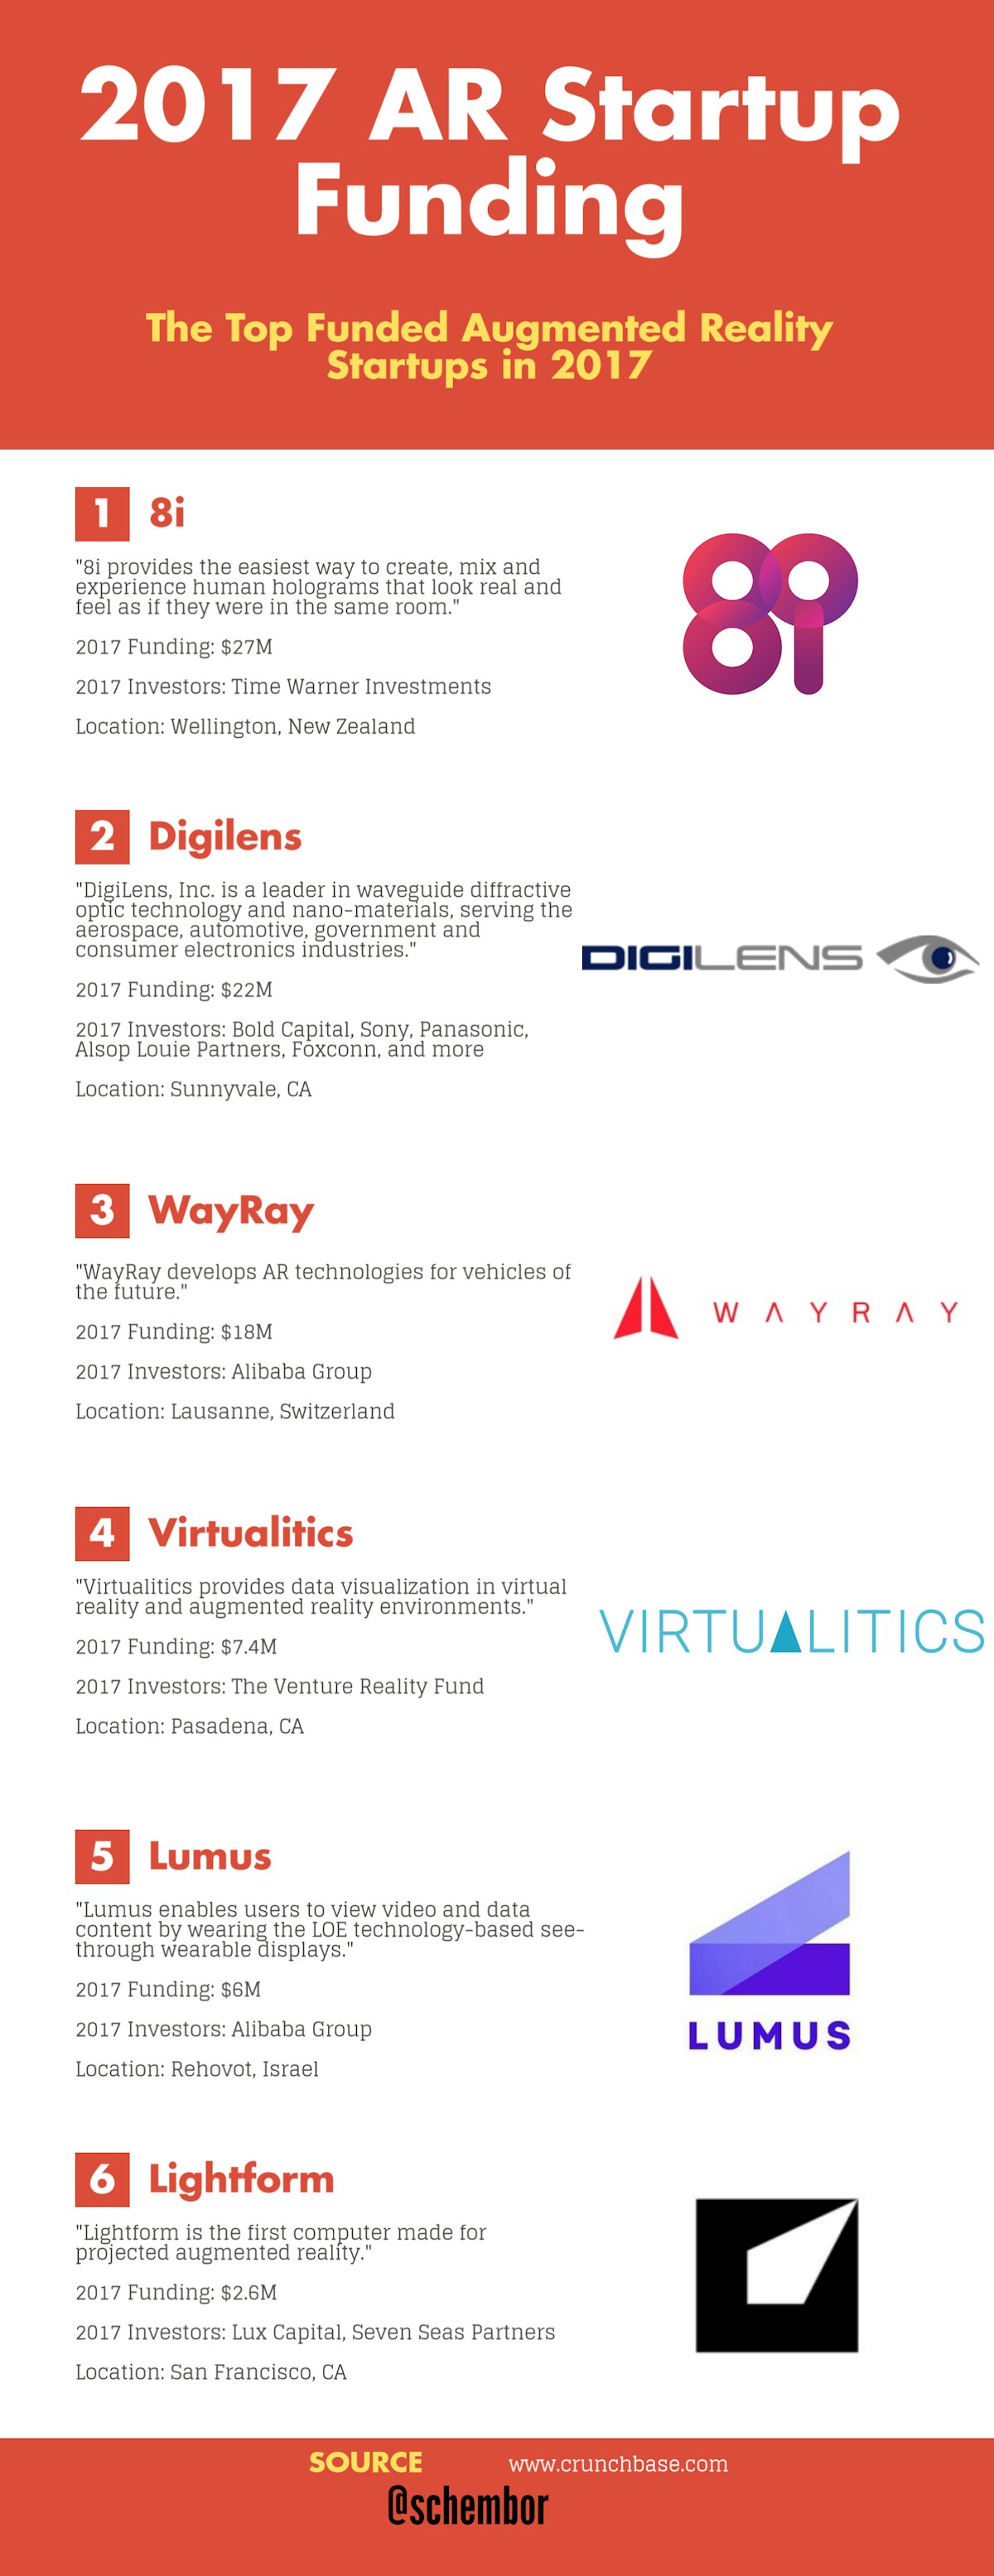 featured image - Augmented Reality Startup Funding in 2017